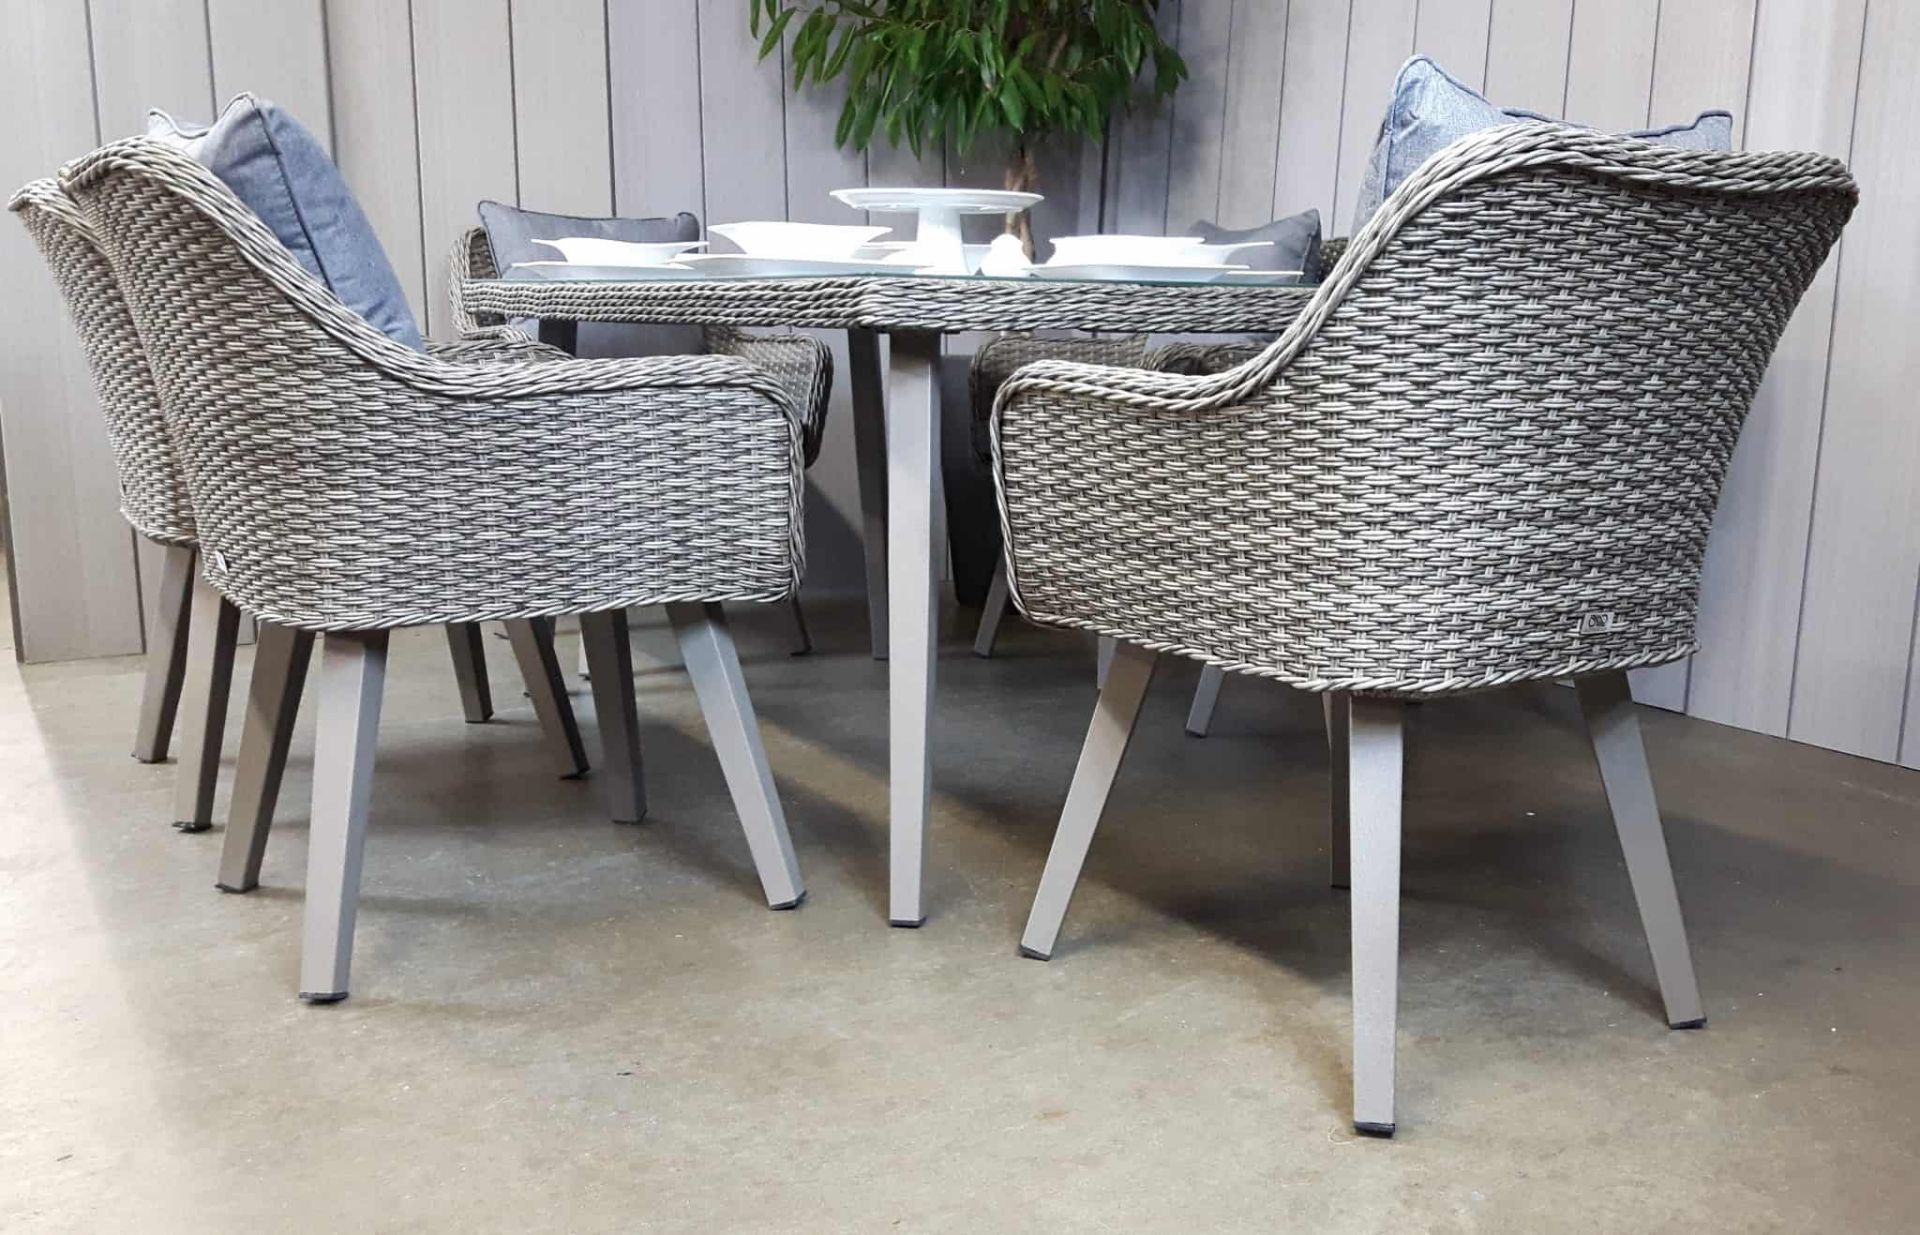 NEW 2019 Hardingham 7 Piece Contemporary All Weather Dining Set - Image 4 of 7